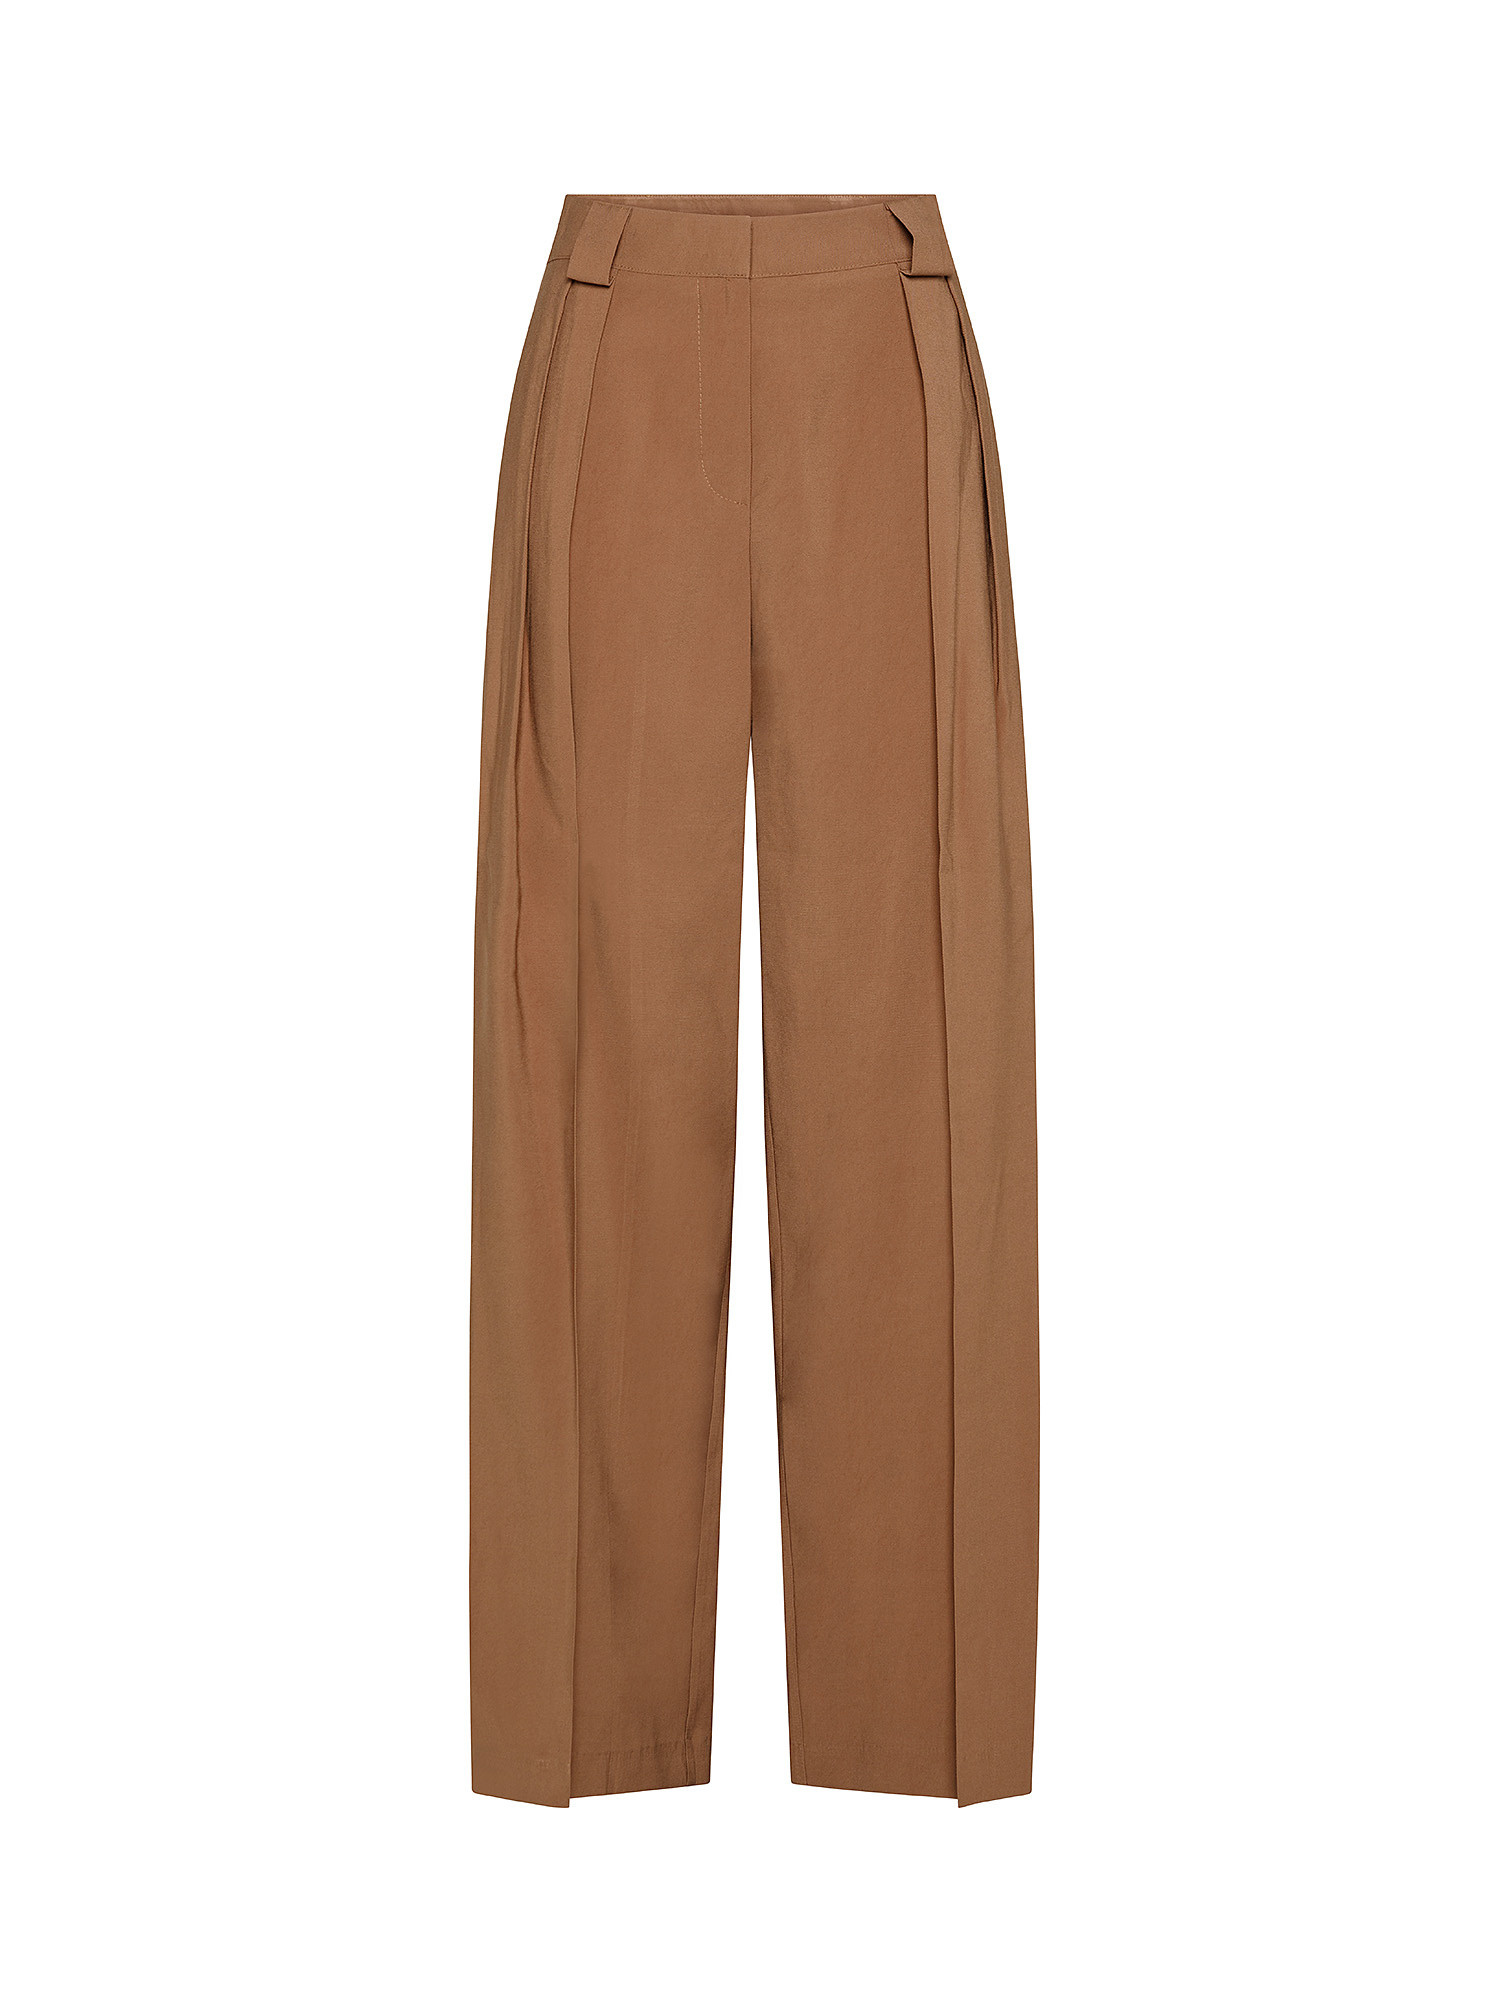 Trousers, Brown, large image number 0